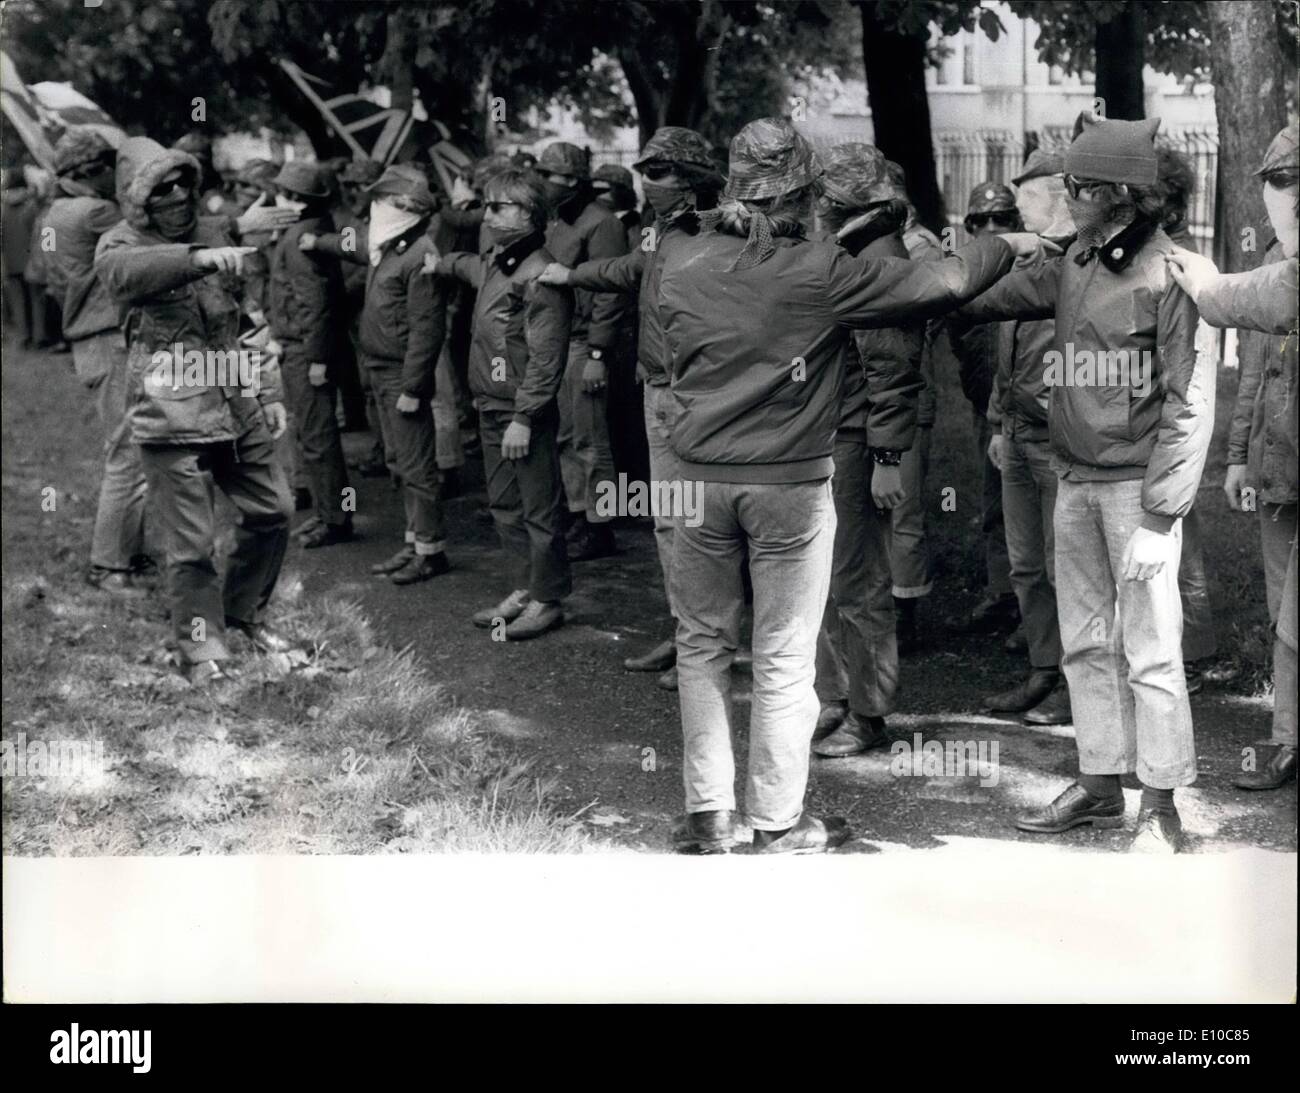 Jun. 06, 1972 - U.D.A in secret training: Members of the Ulster Defense Association have recently have recently begun guerilla-warfare training in a secluded camp on the outskirts of Ulster. The masked members are on an assult and the finer points of handling weapons. The U.D.A. is a protestant group who have fashioned themselves in full military procedure. Even when marching through the main streets of Belfest they stick to their formal drill, as showing during the recent rally at Woodvele Park, Belfast Stock Photo